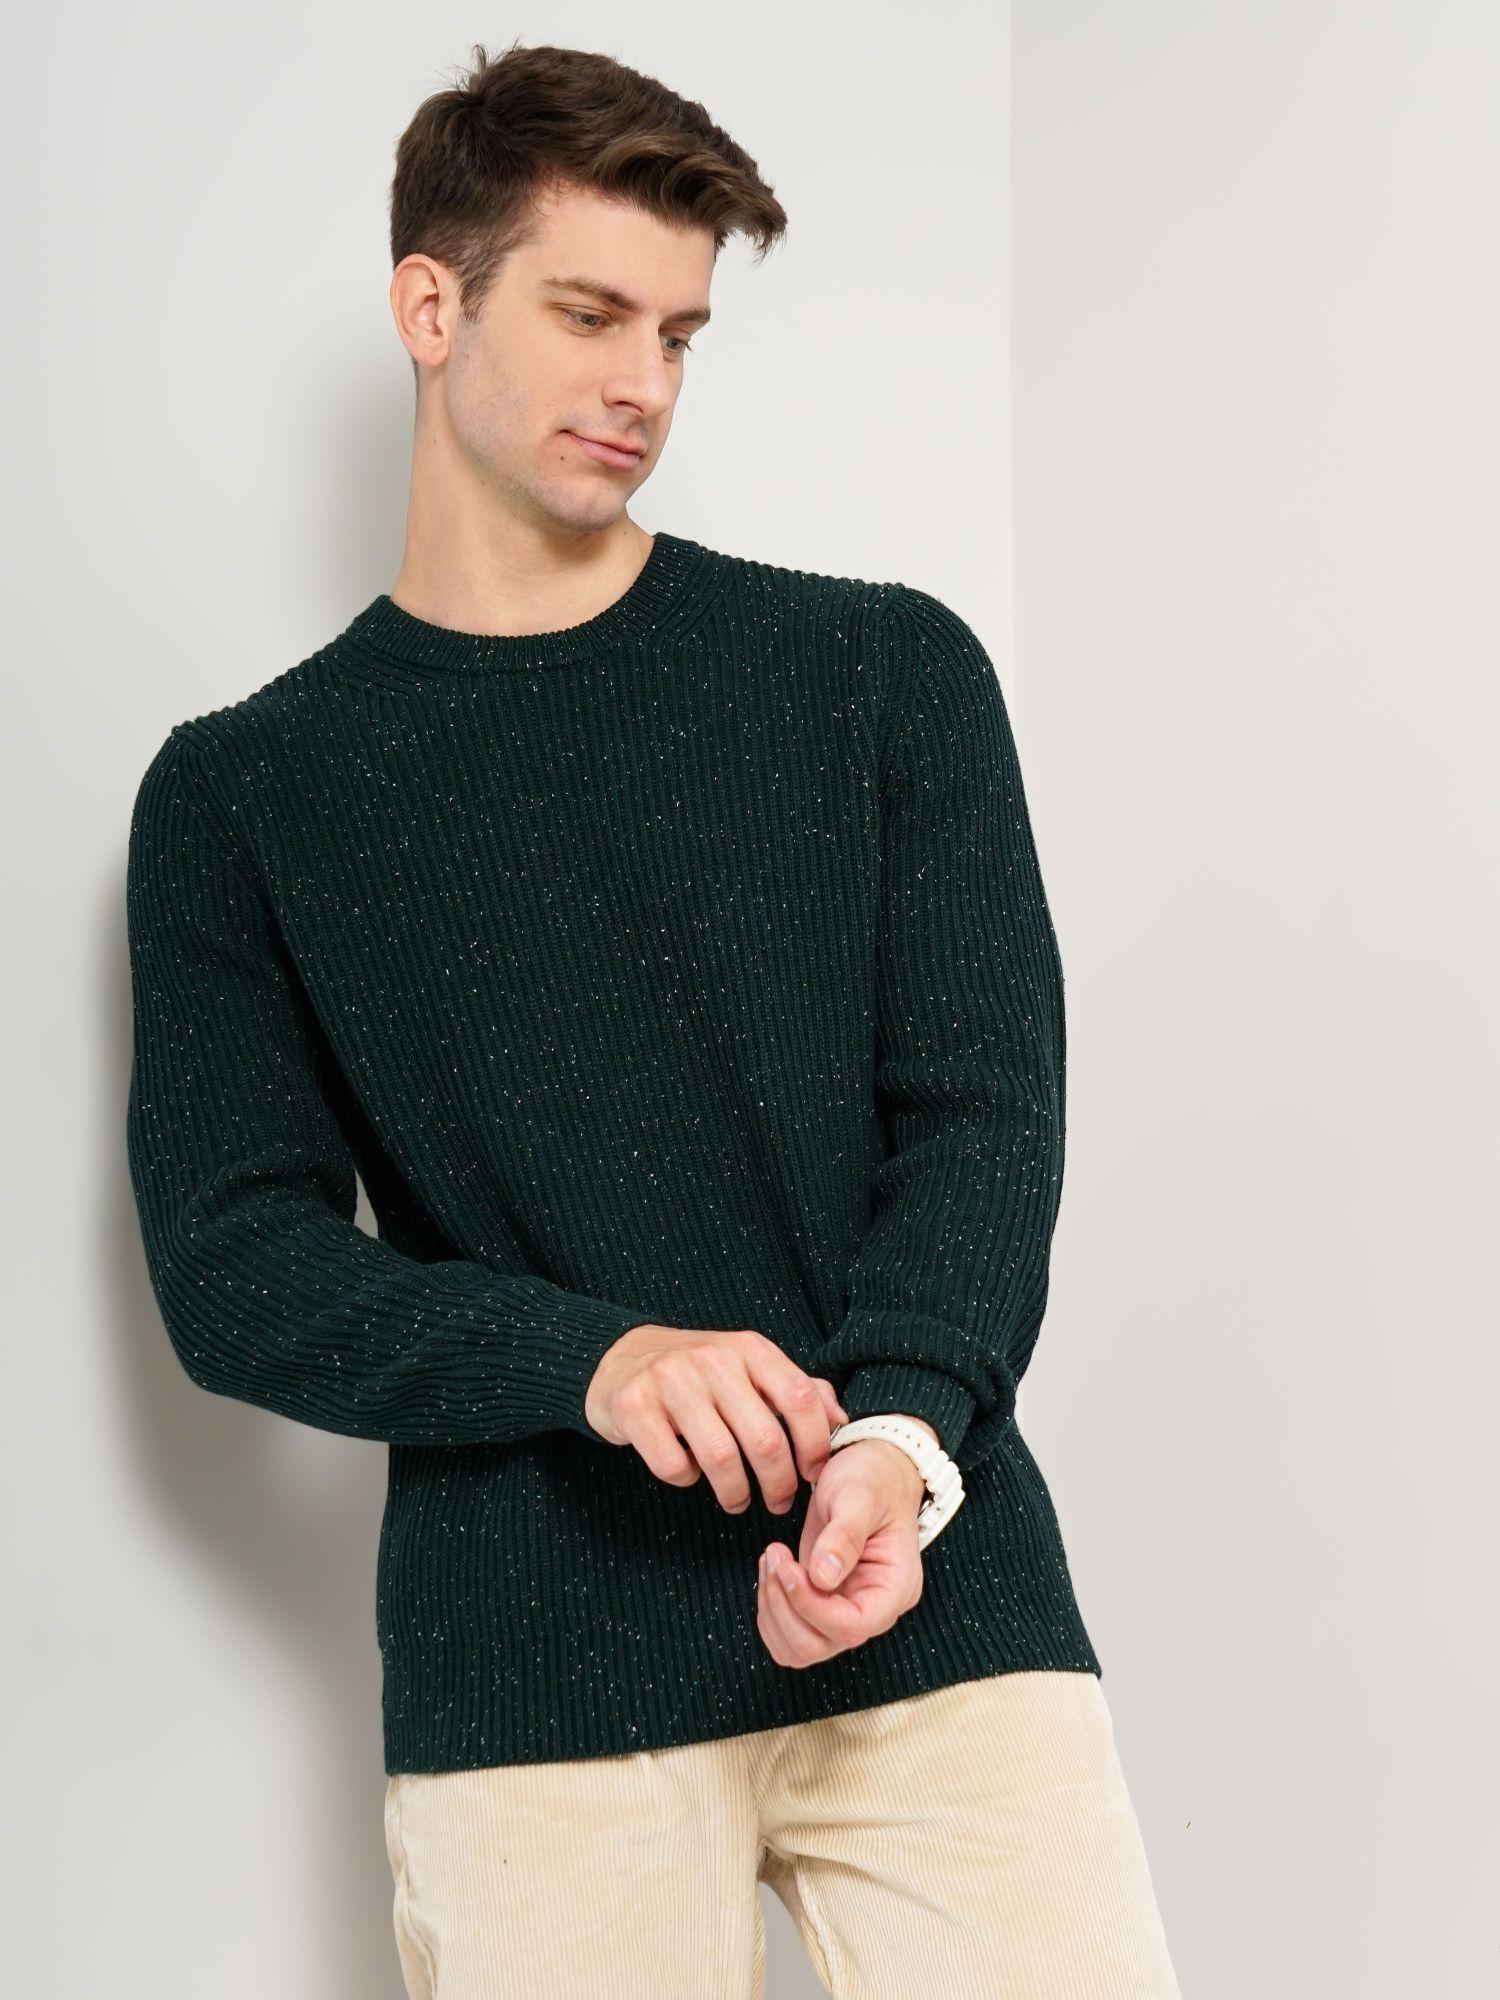 mens-textured-sweater